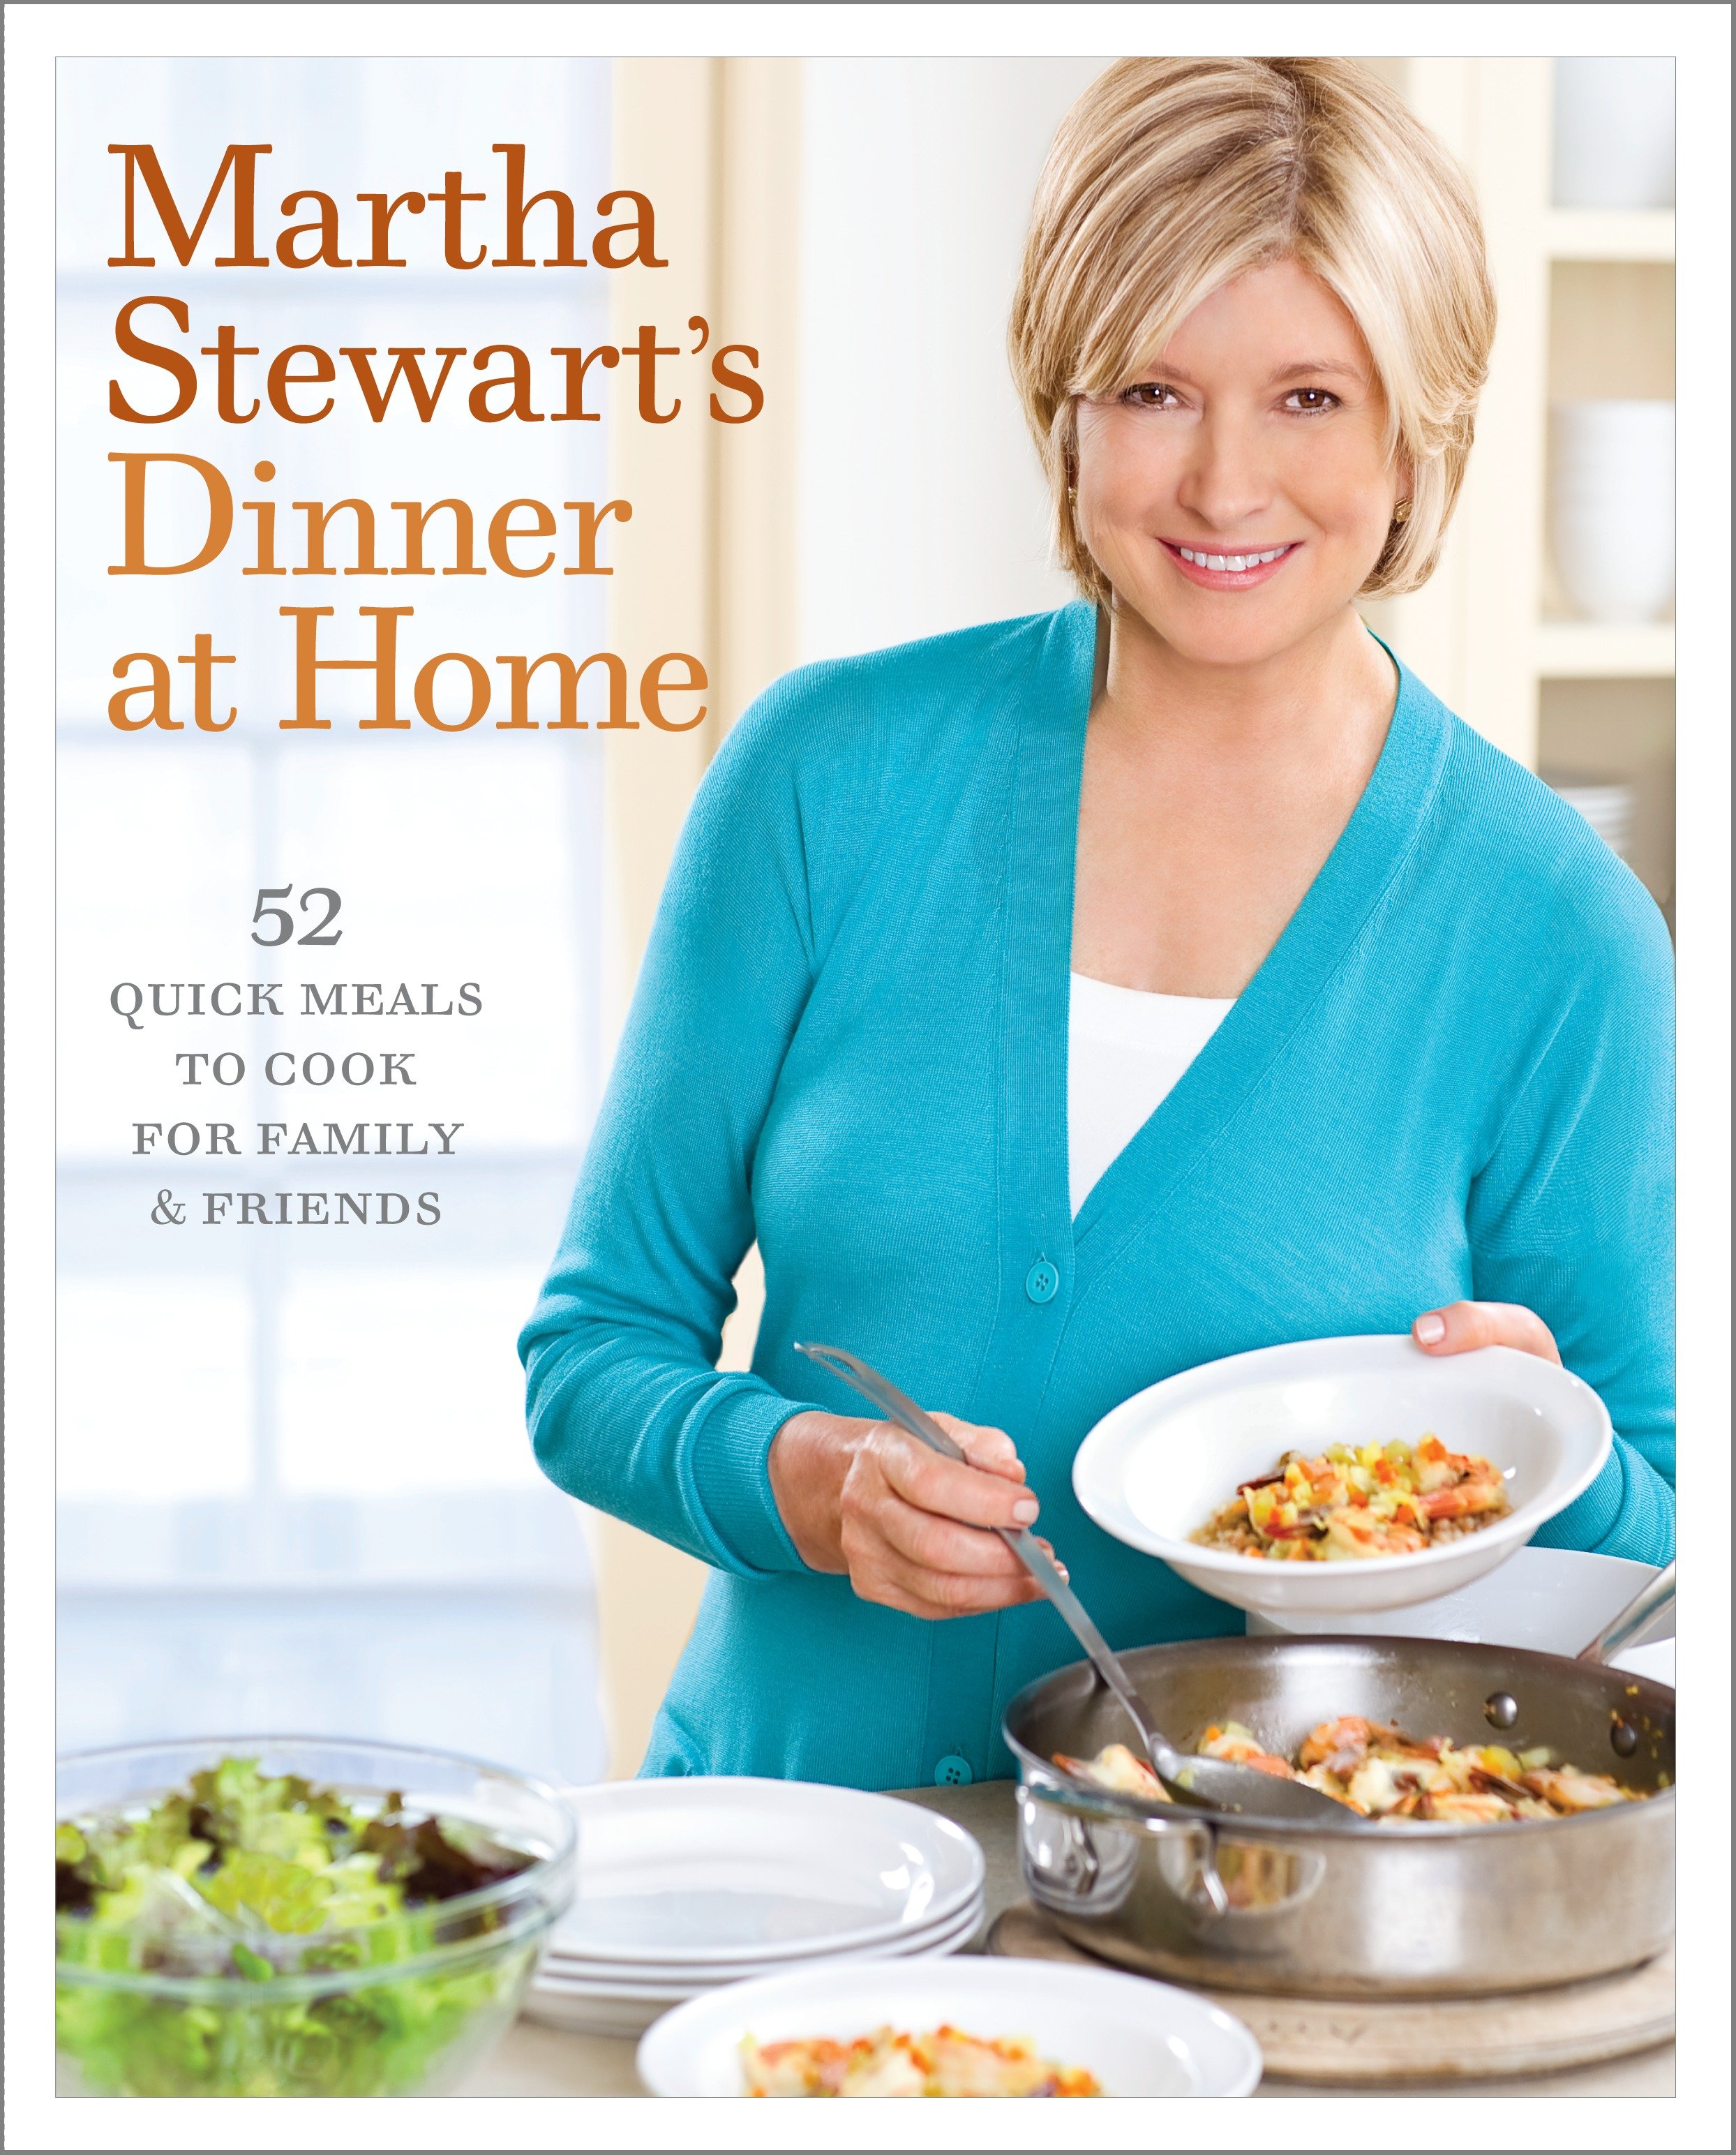 Martha Stewart's Dinner at Home: 52 Quick Meals to Cook for Family and Friends: A Cookbook (Hardcover) - image 1 of 2